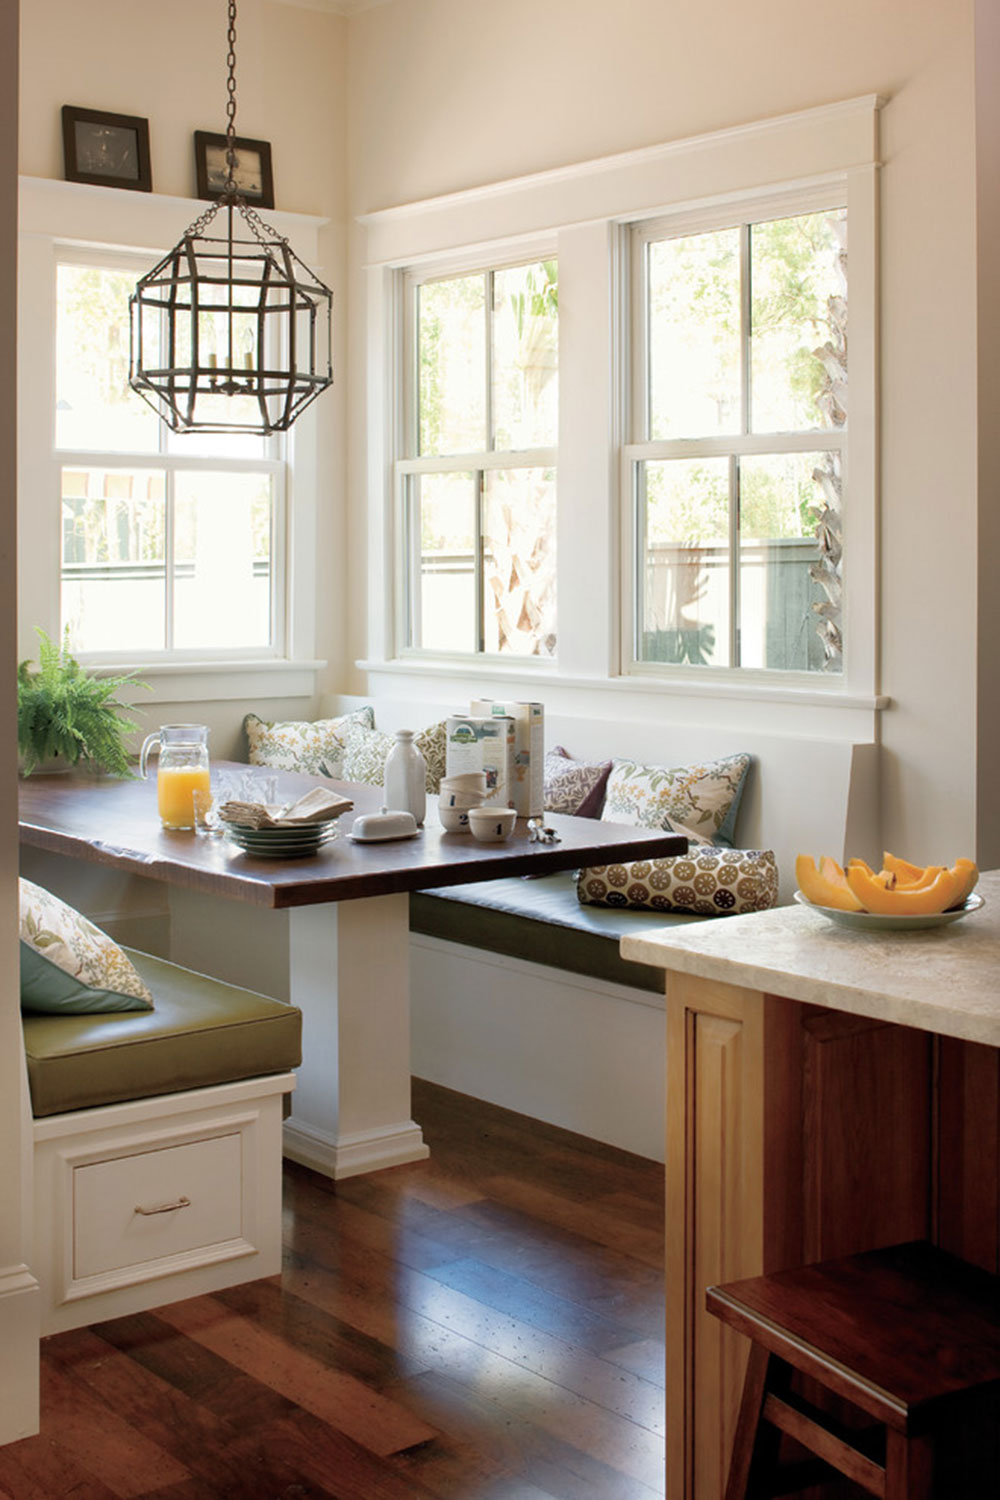 Breakfast-Nook-Design-Ideas-For-Awesome-Mornings1 Breakfast Nook Design Ideas For Awesome Mornings